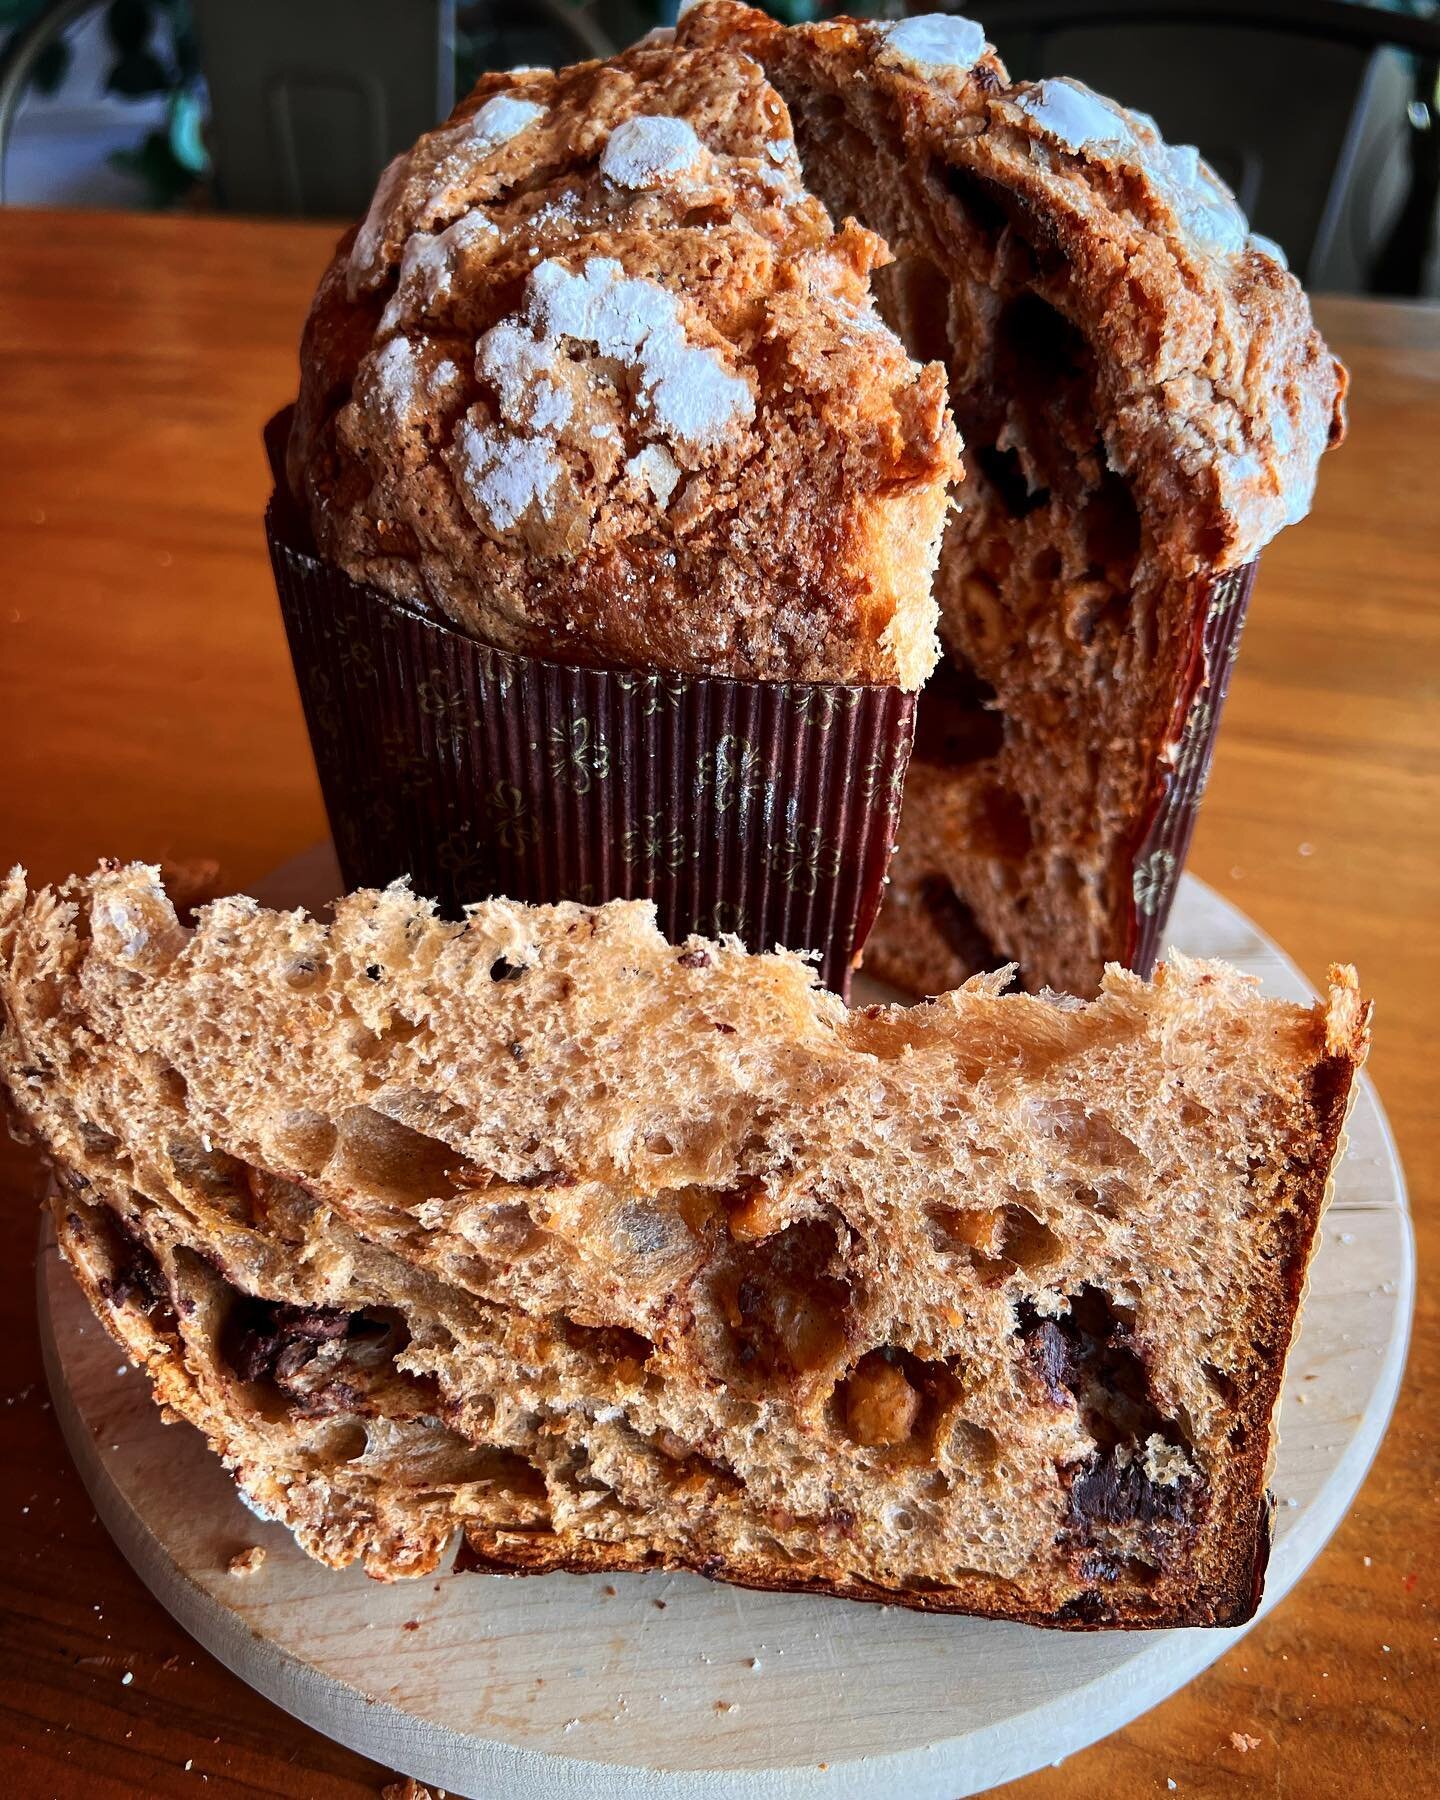 Chocolate Hazelnut (gianduja) Panettone

The second flavor I will be making for your holiday season is a naturally leavened panettone made with chocolate hazelnut cream, vanilla beans, 55% dark chocolate chunks, and candied hazelnuts.  Please allow 2